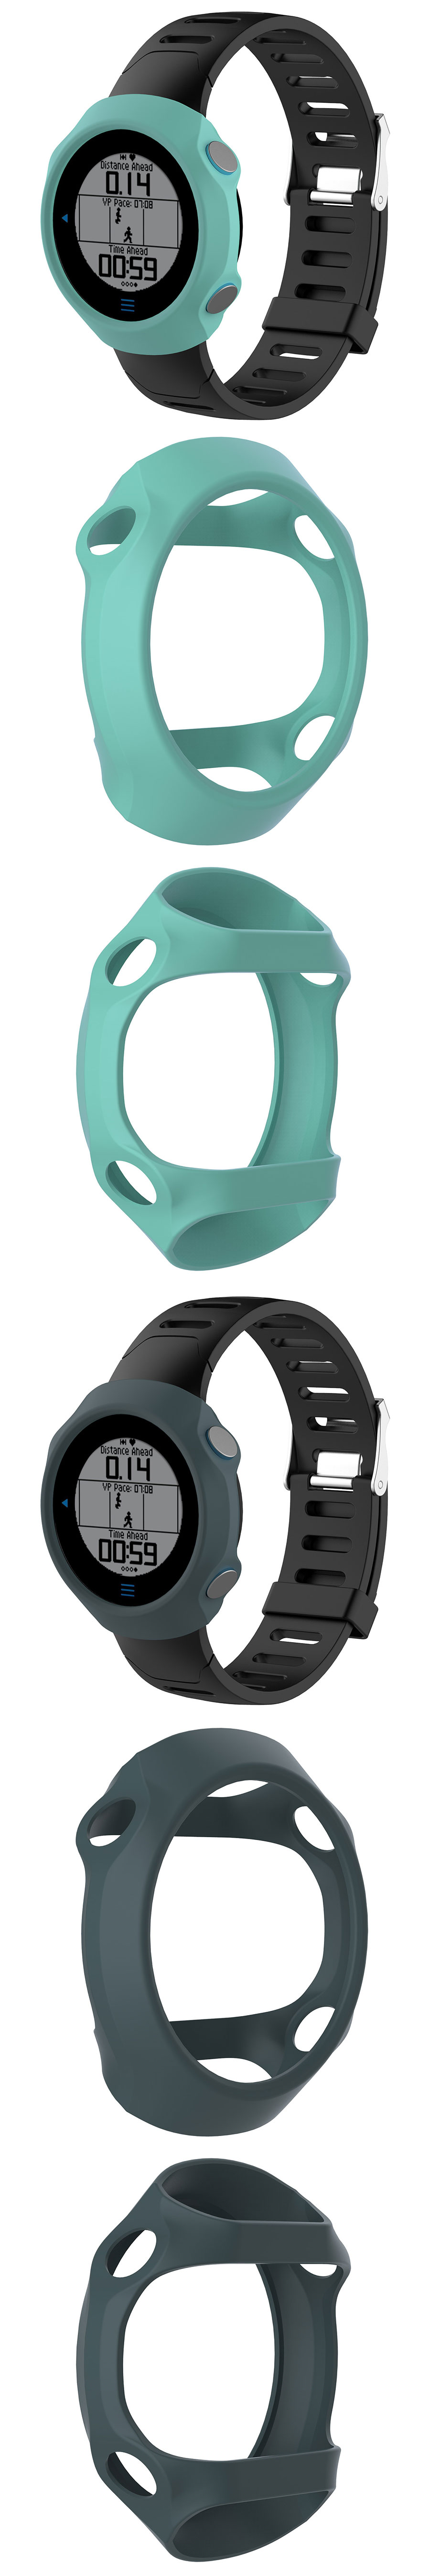 Colorful-Silicone-Protective-Watch-Case-Cover-Watch-Tools-for-Garmin-forerunner-610-1312913